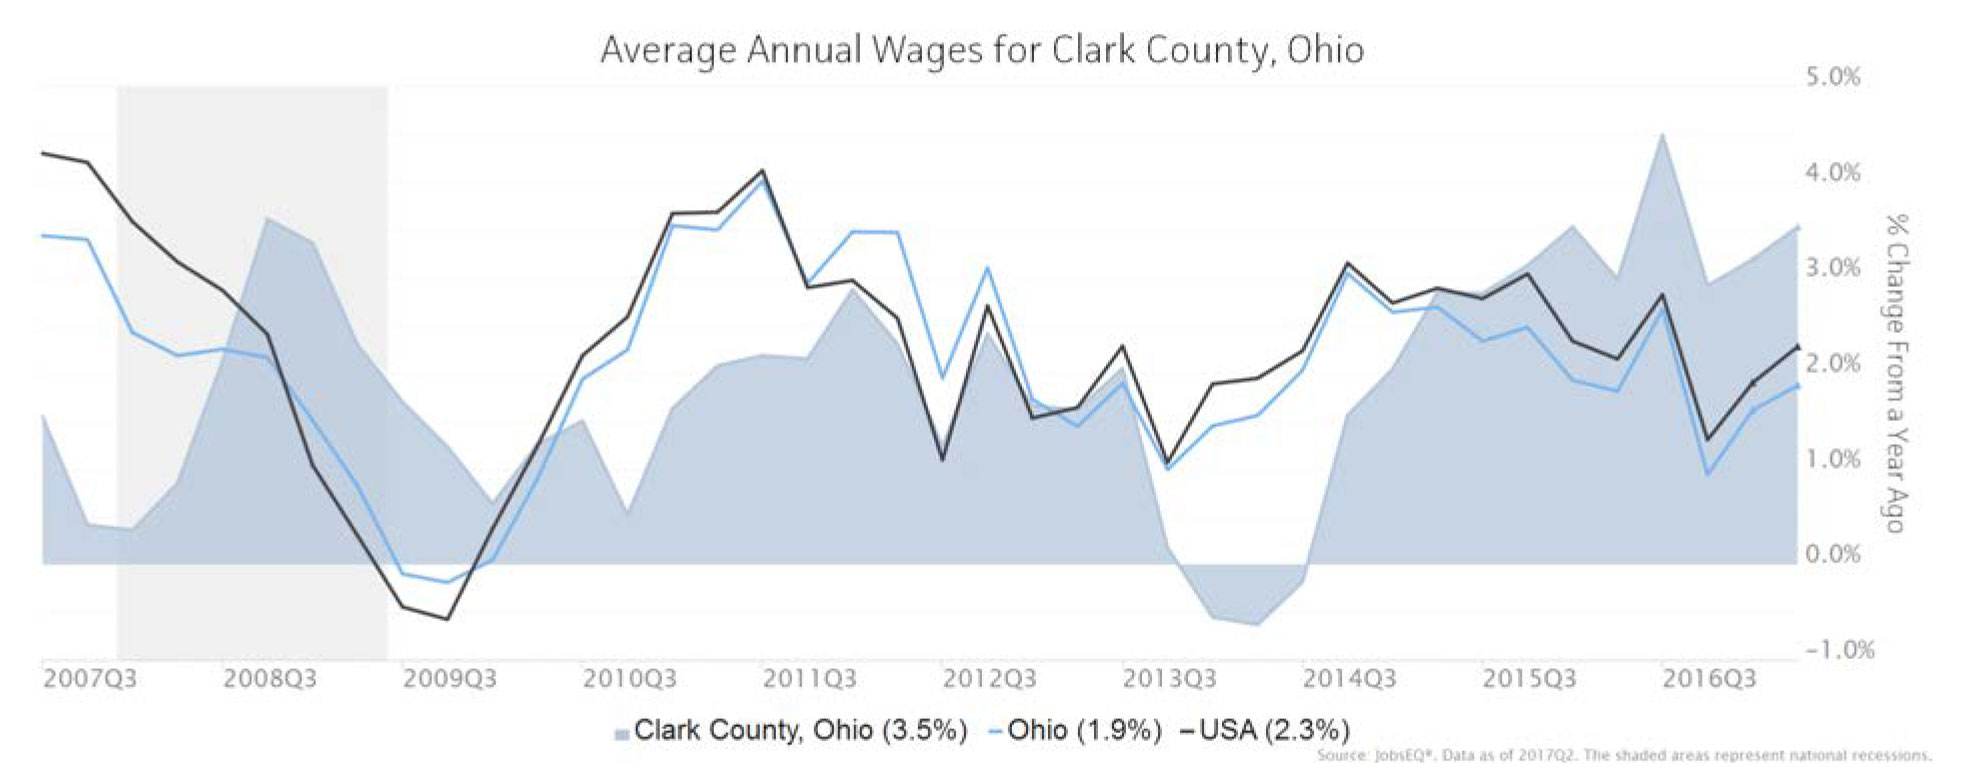 wage trends